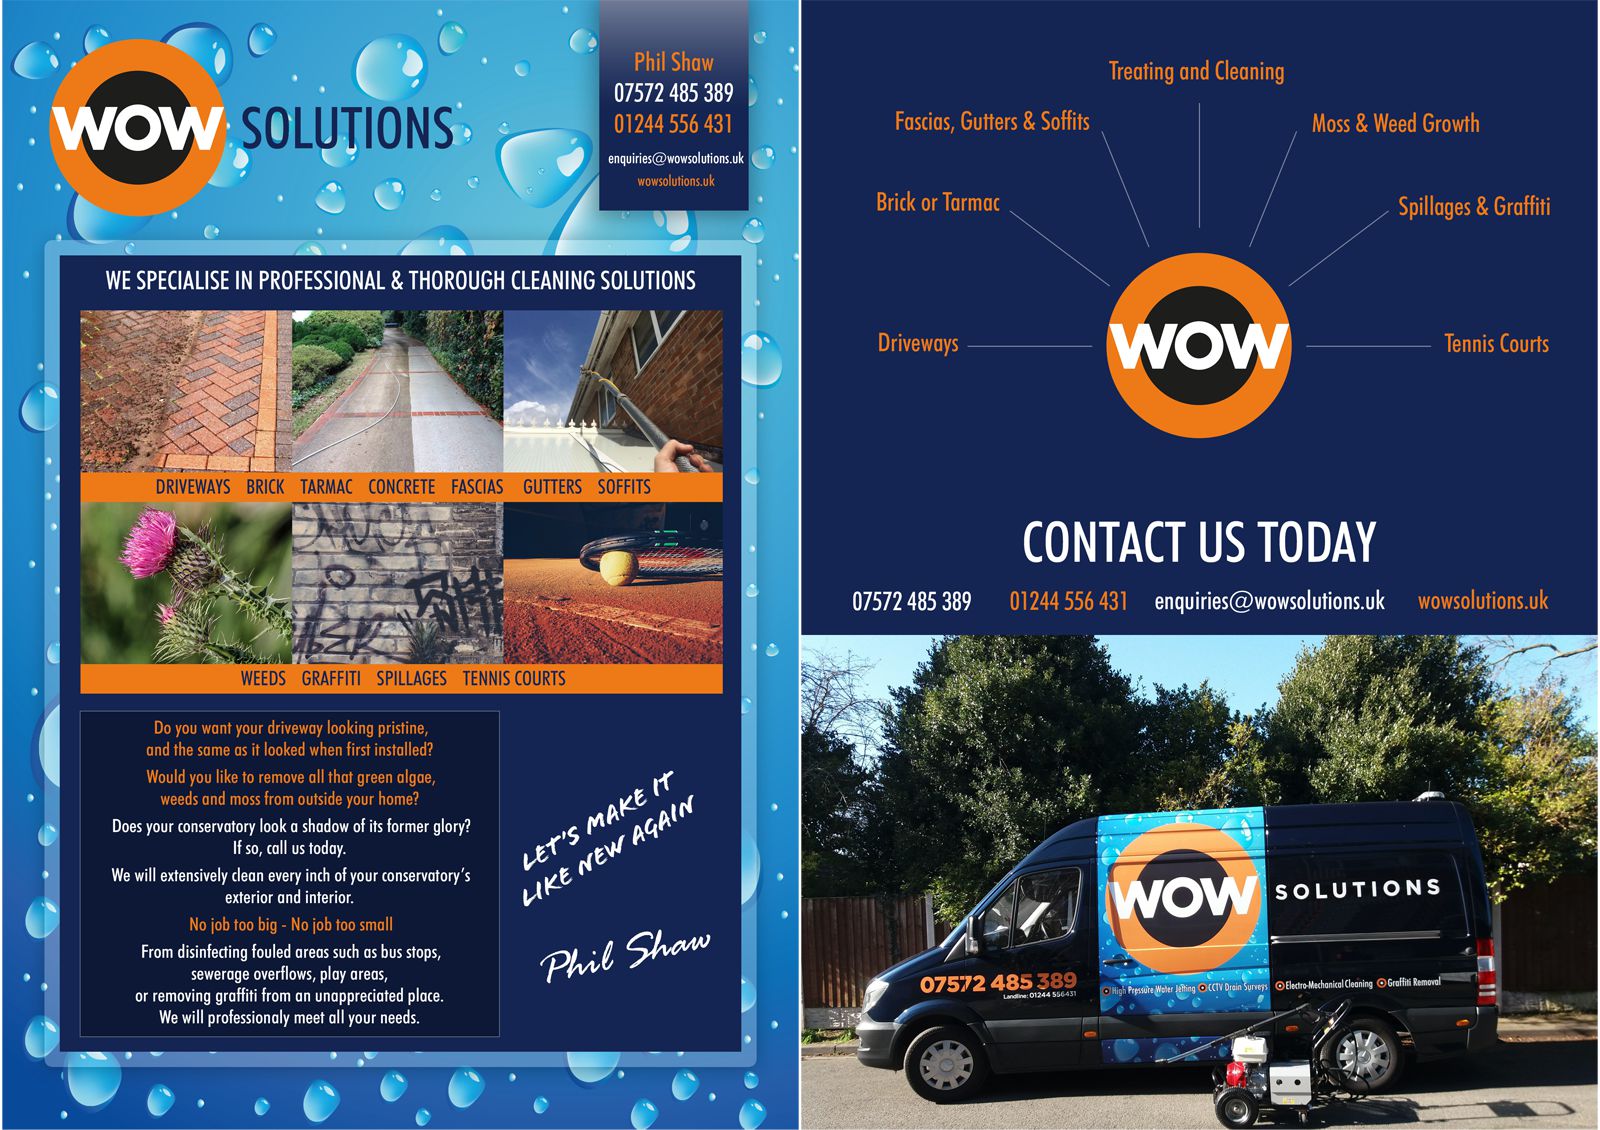 Flintshire Drain Clearance and Commercial Cleaning Services - Leaflet